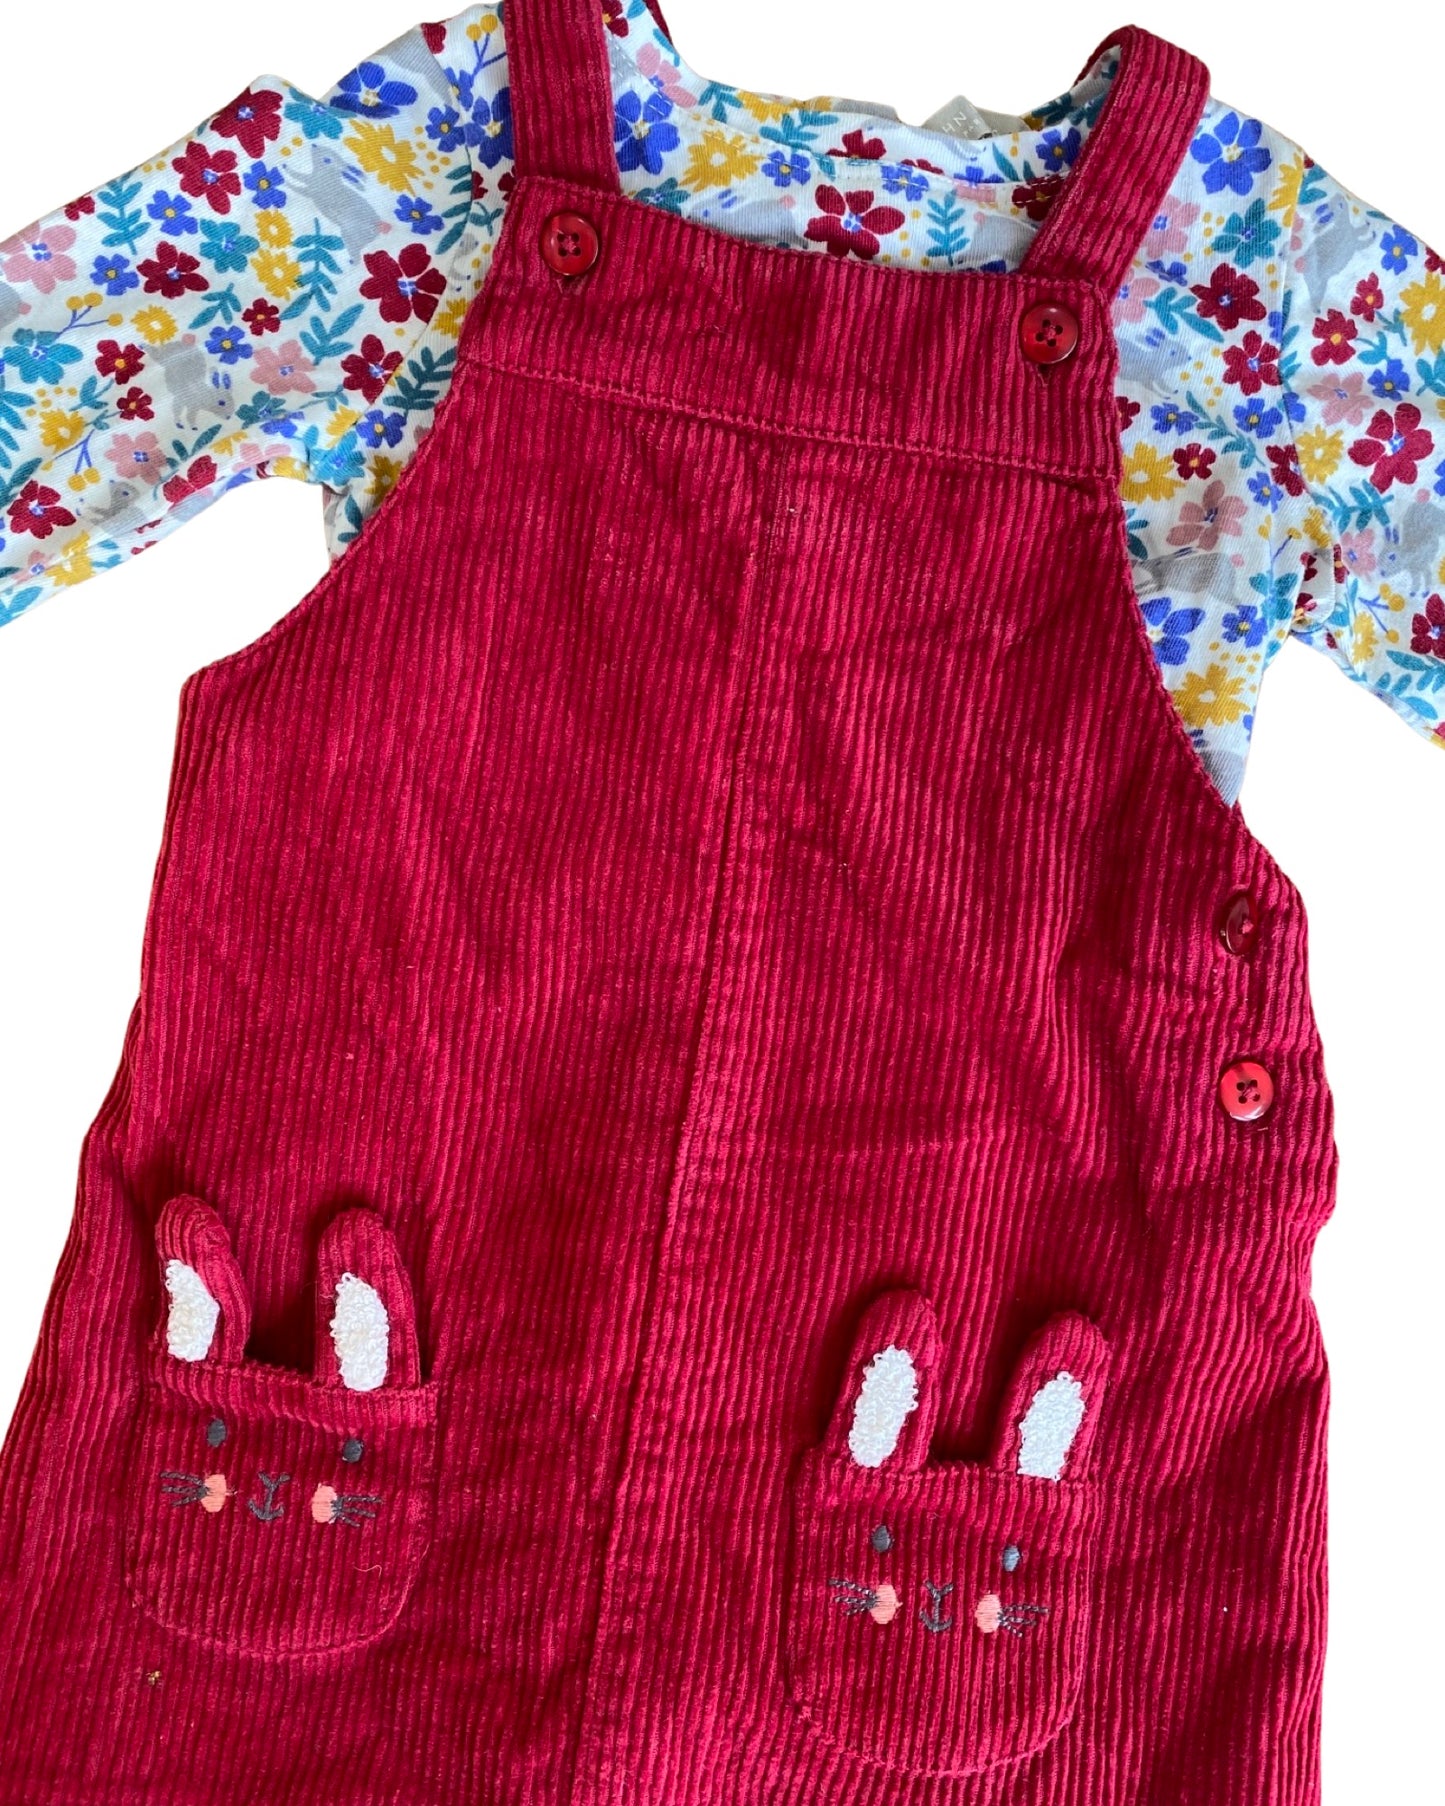 John Lewis red cord dress with bunny pockets and long sleeve floral top (6-9mths)